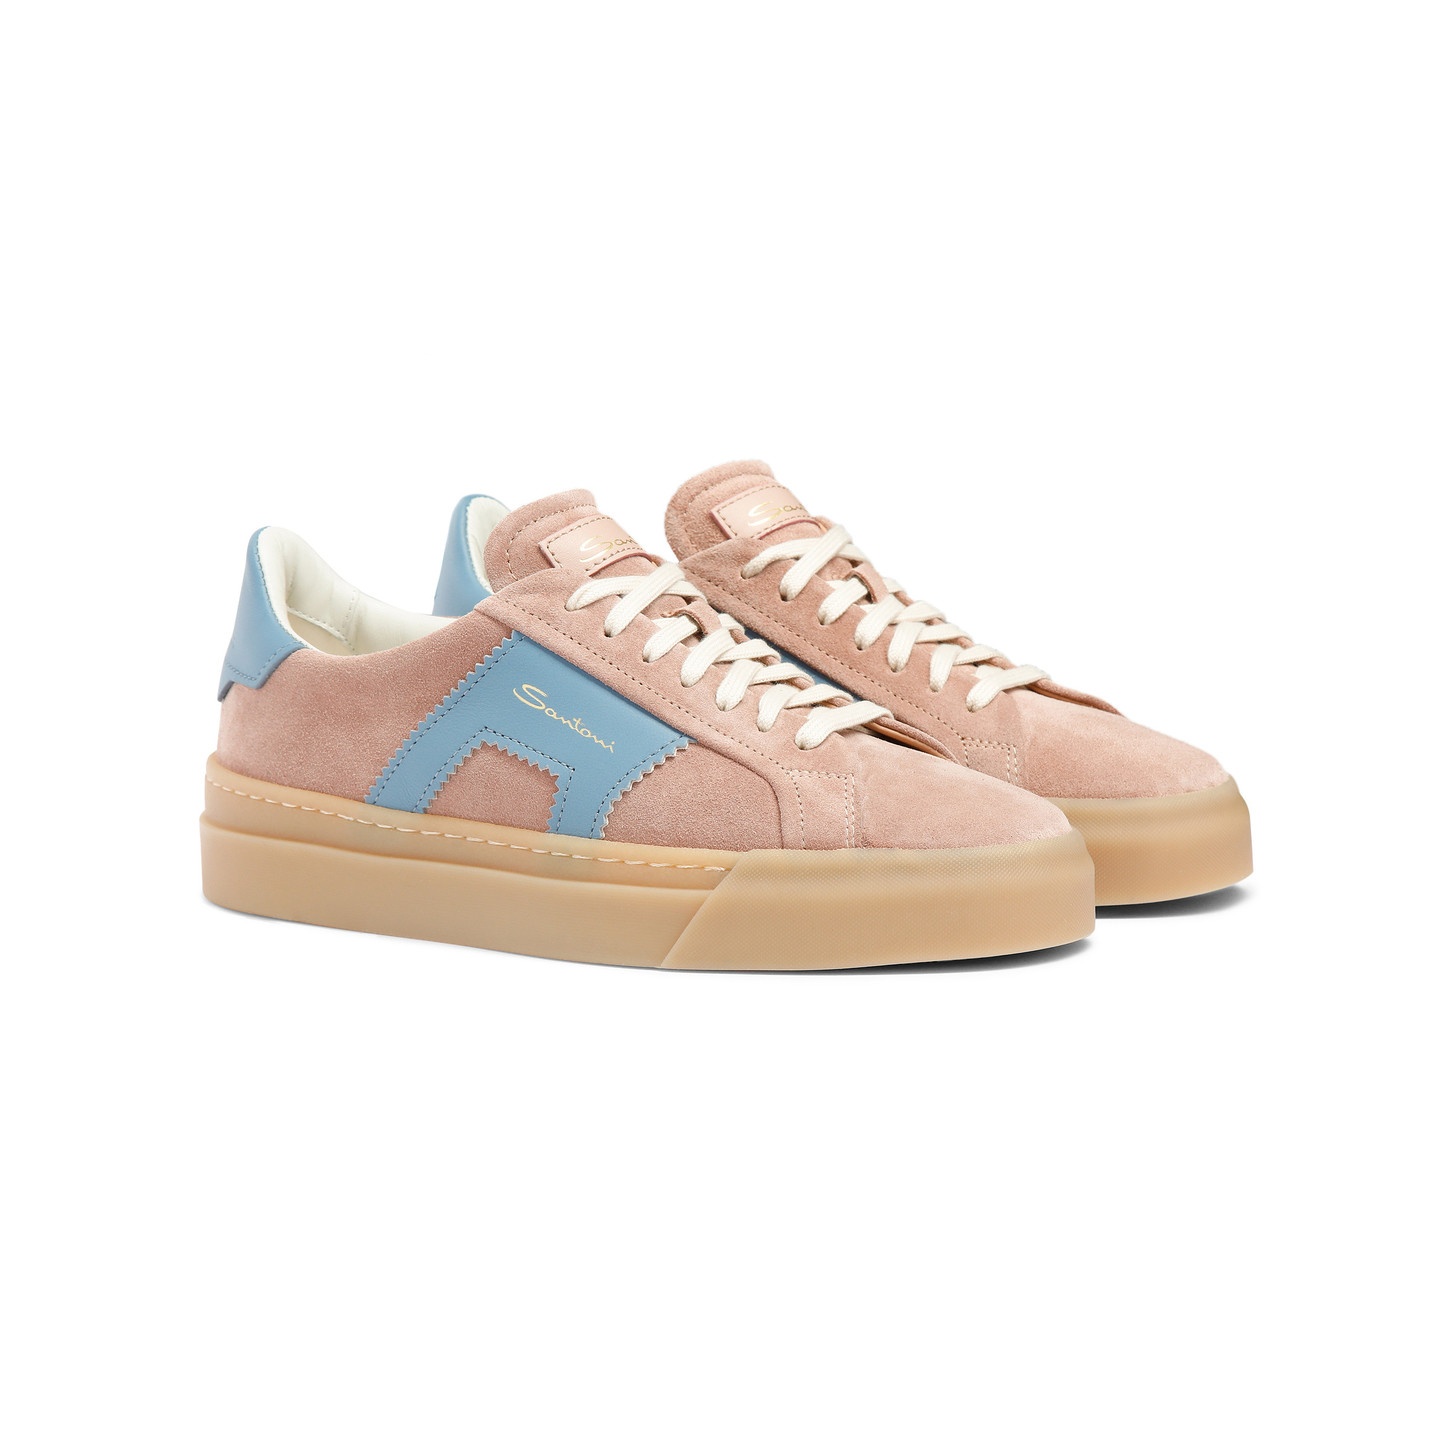 Women's pink and light blue suede and leather double buckle sneaker - 3